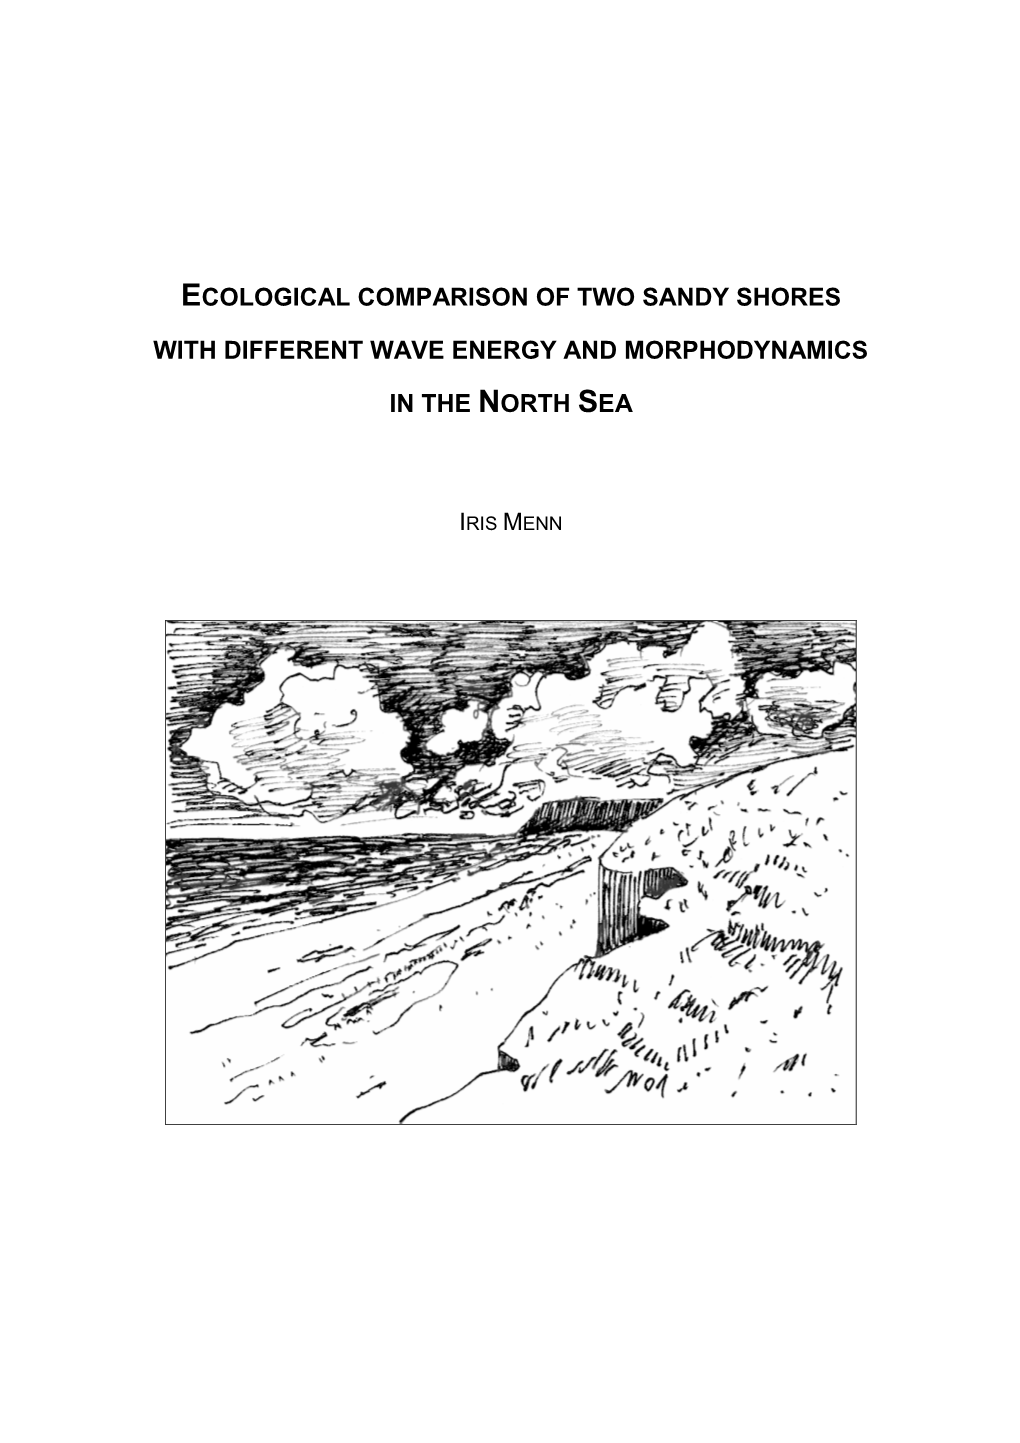 Ecological Comparison of Two Sandy Shores with Different Wave Energy and Morphodynamics in the North Sea“, Fachbereich Biologie Universität Hamburg, 196 Seiten